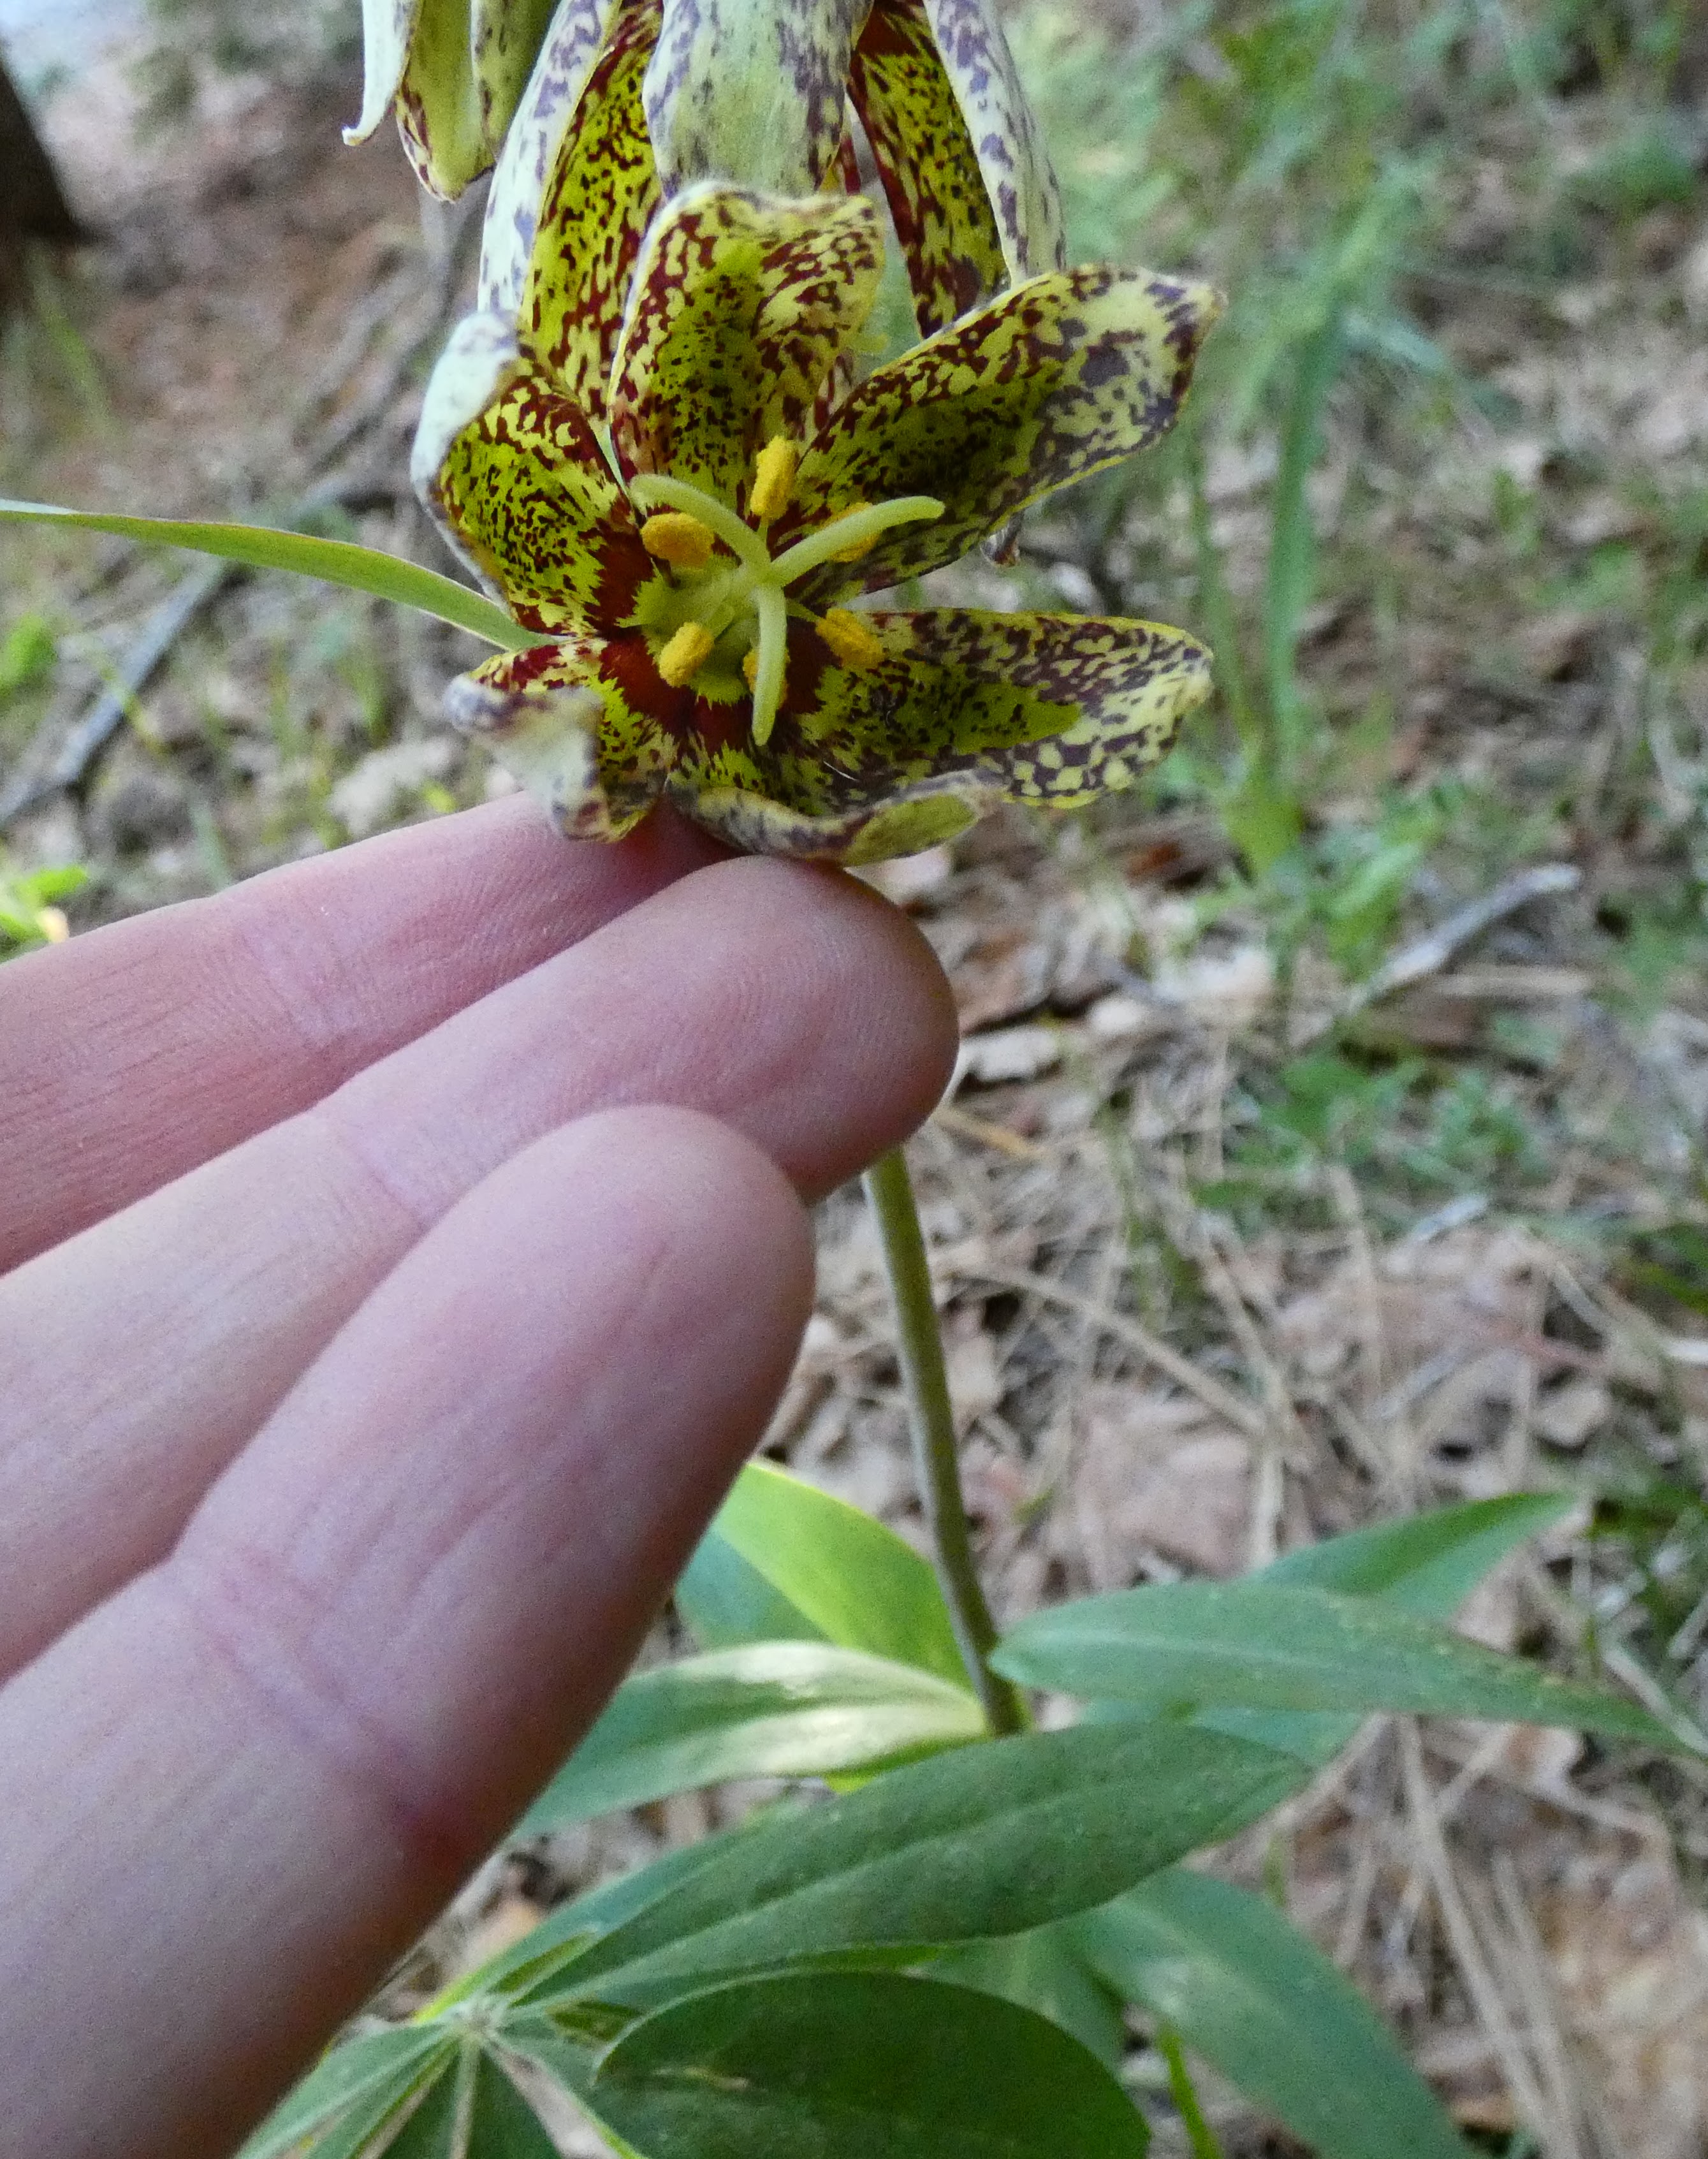 A Fritillaria flower, which is a large pendant flower. The petals are greenish and speckled with red.